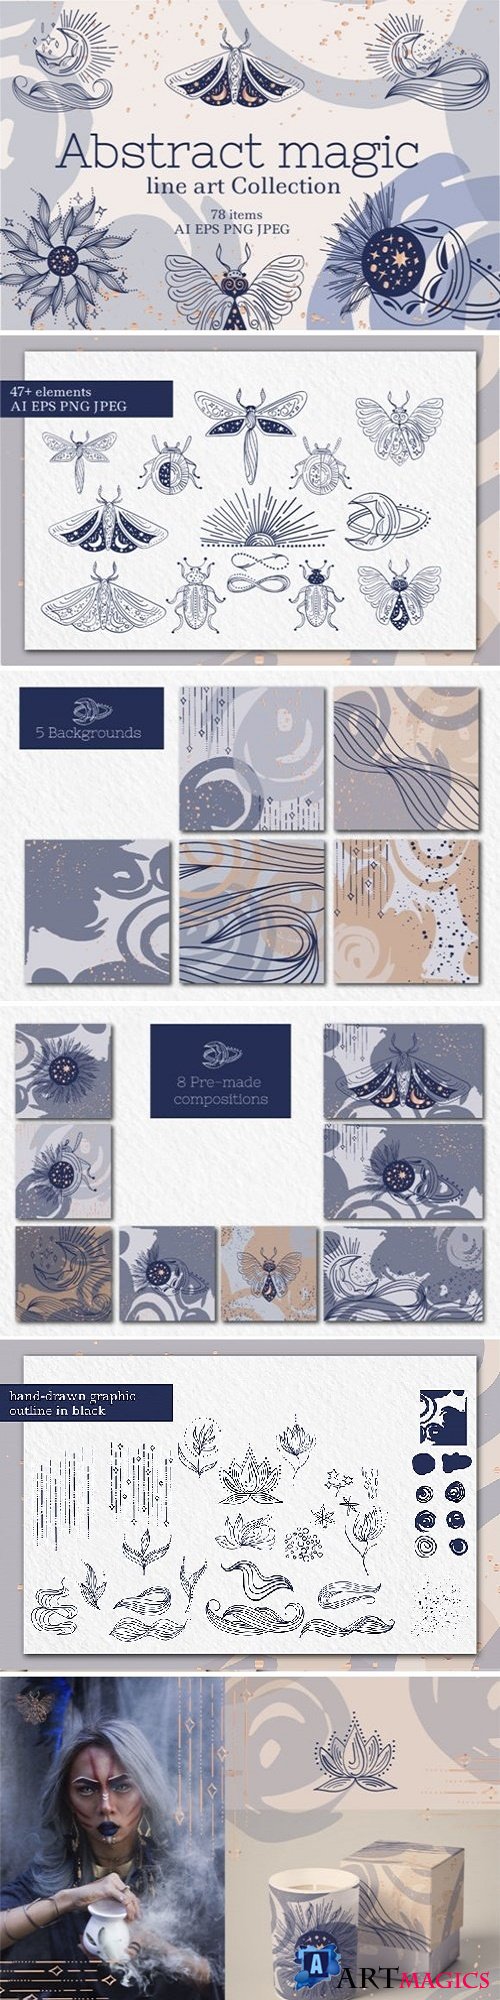 Abstract magic line art Collection - 515206